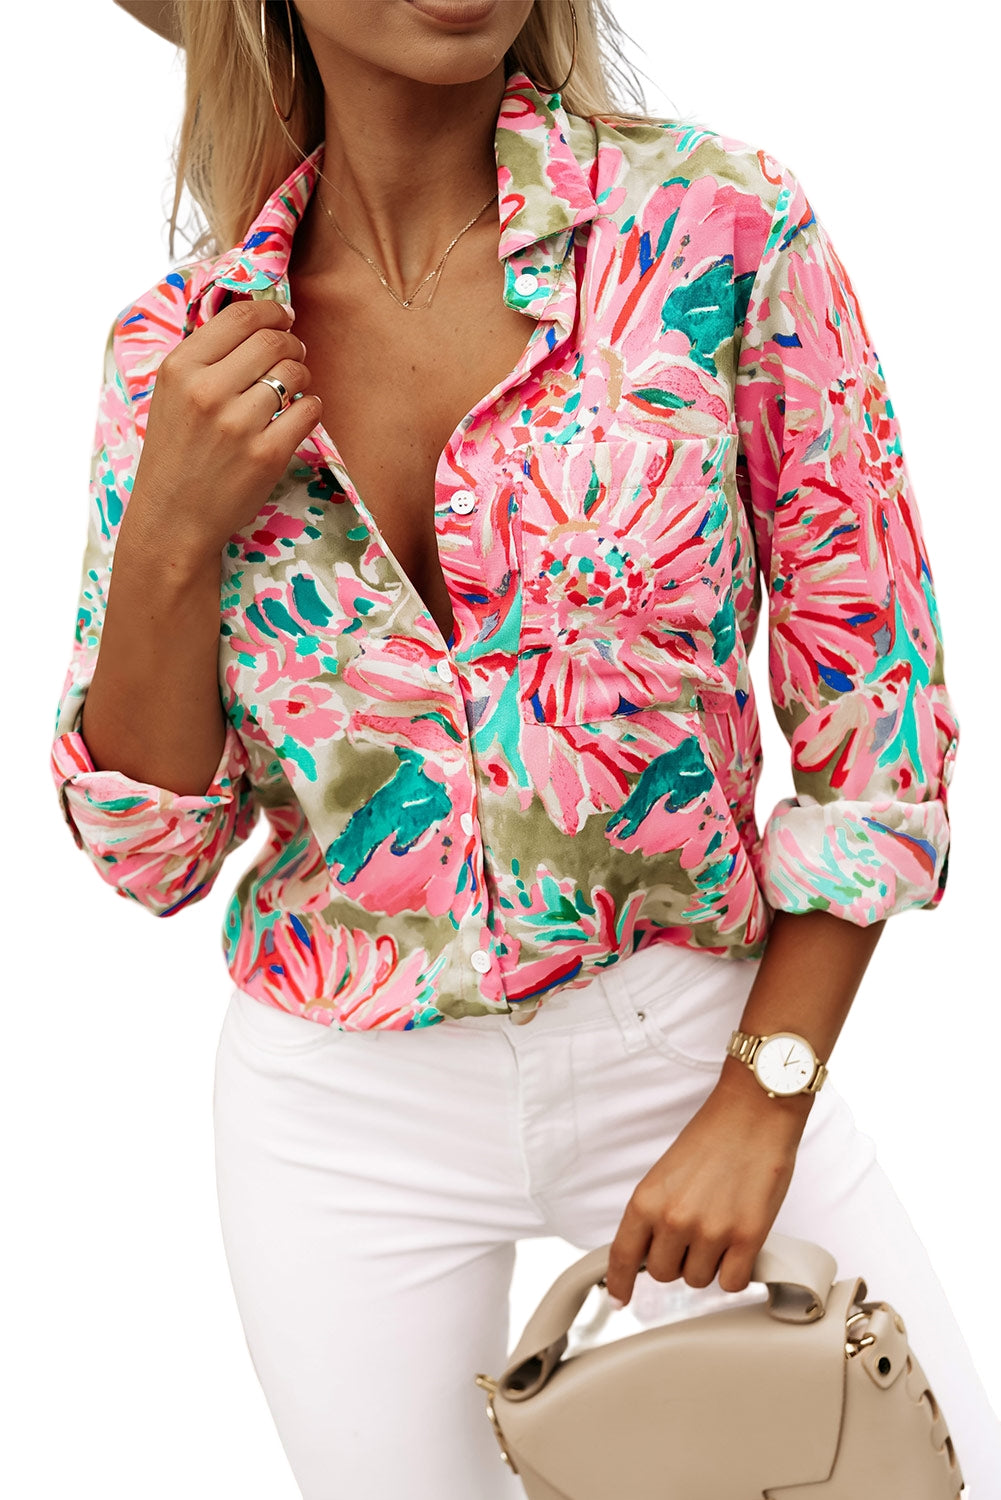 Green Abstract Floral Print Buttoned Sheath Long Sleeve Shirt